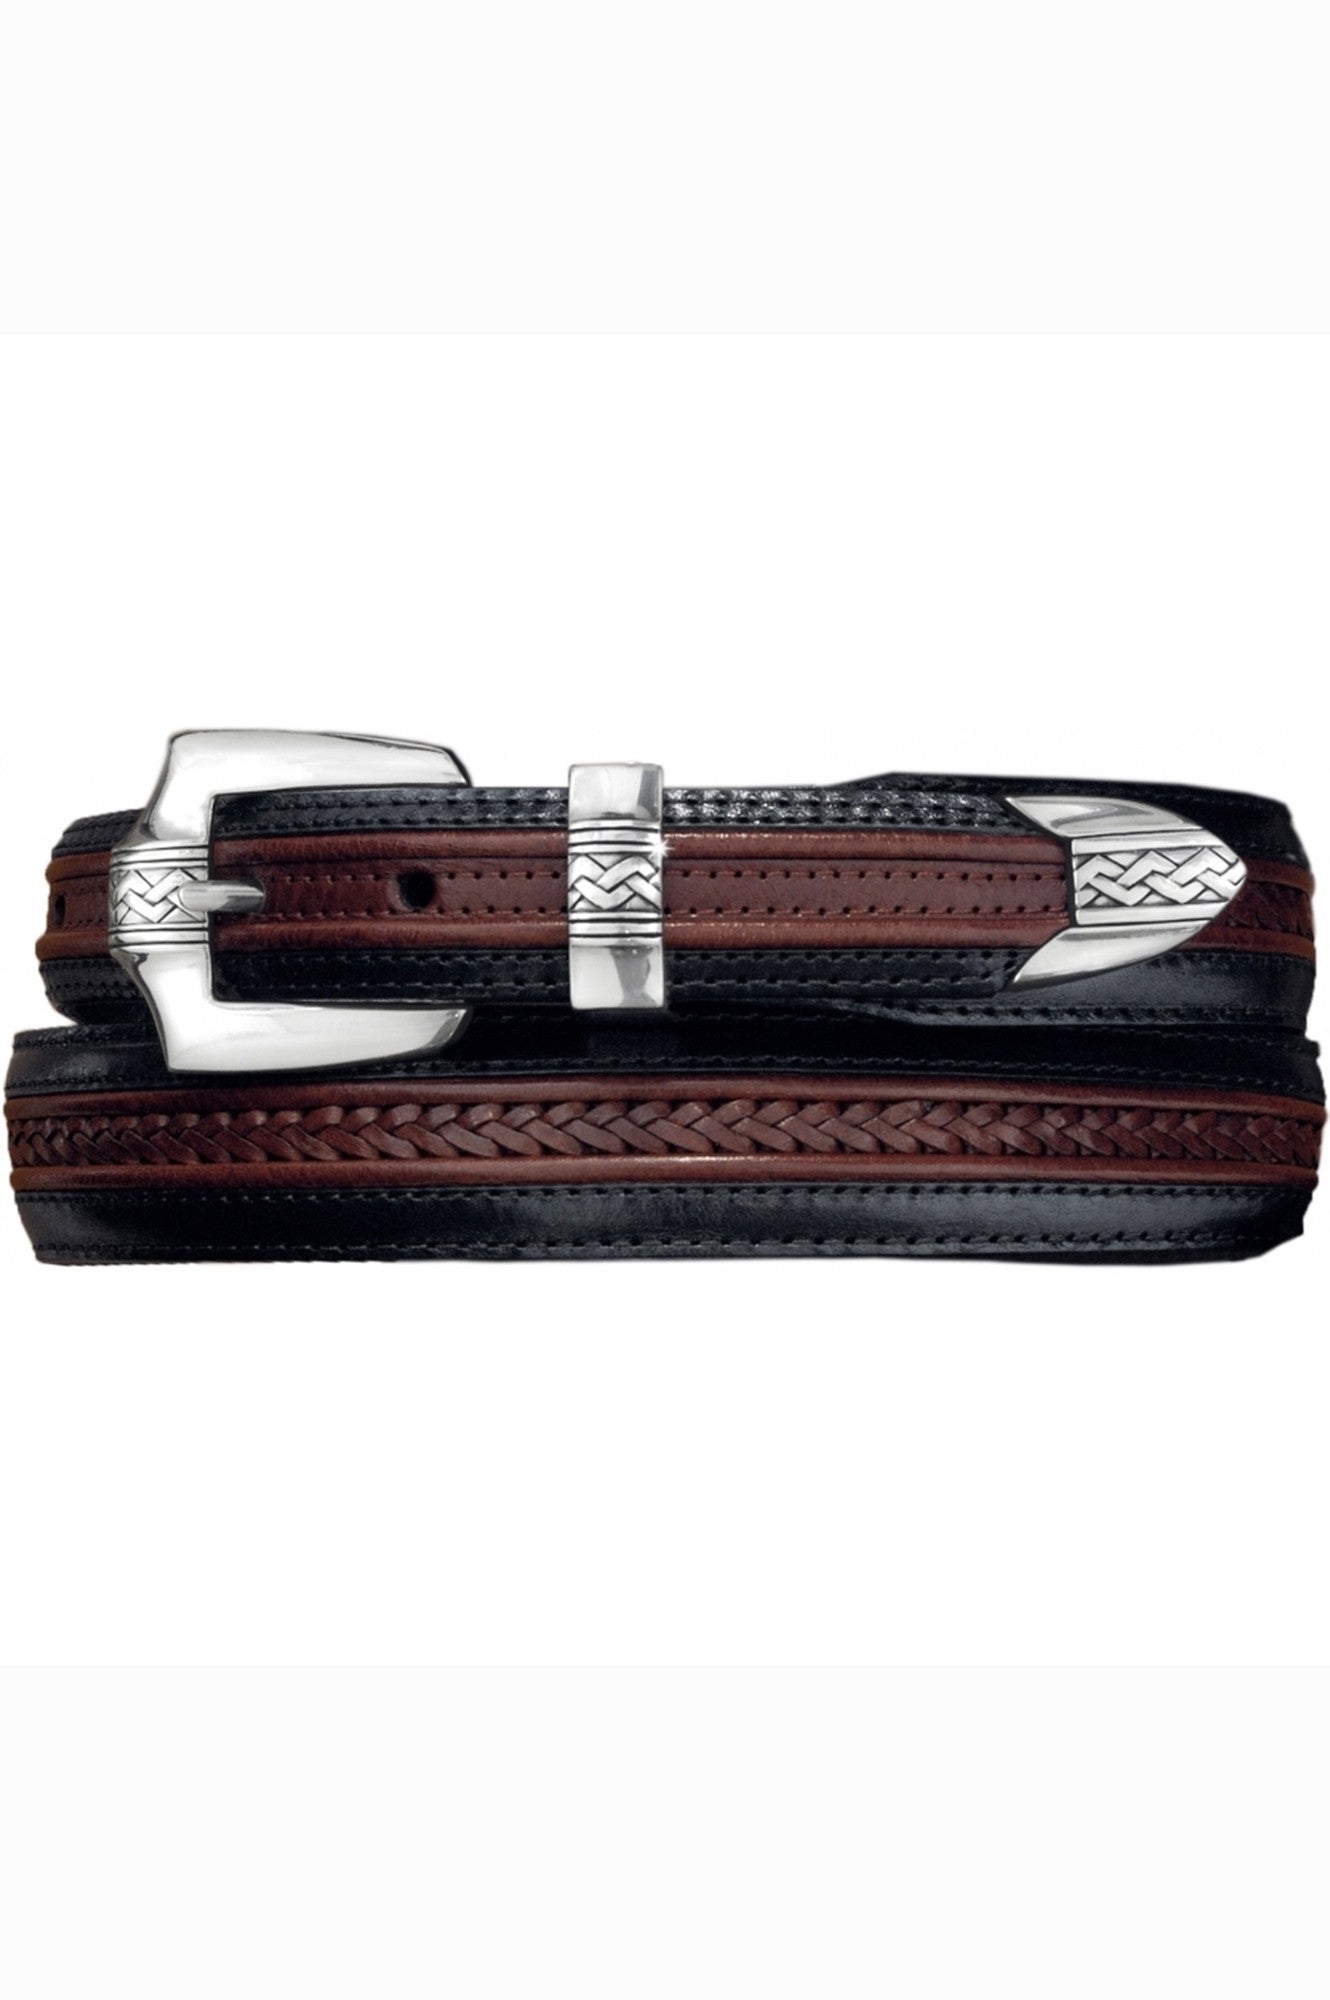 mens leather belt, brighton belts, brown and black leather belt, mens leather belts from brighton, brighton leather